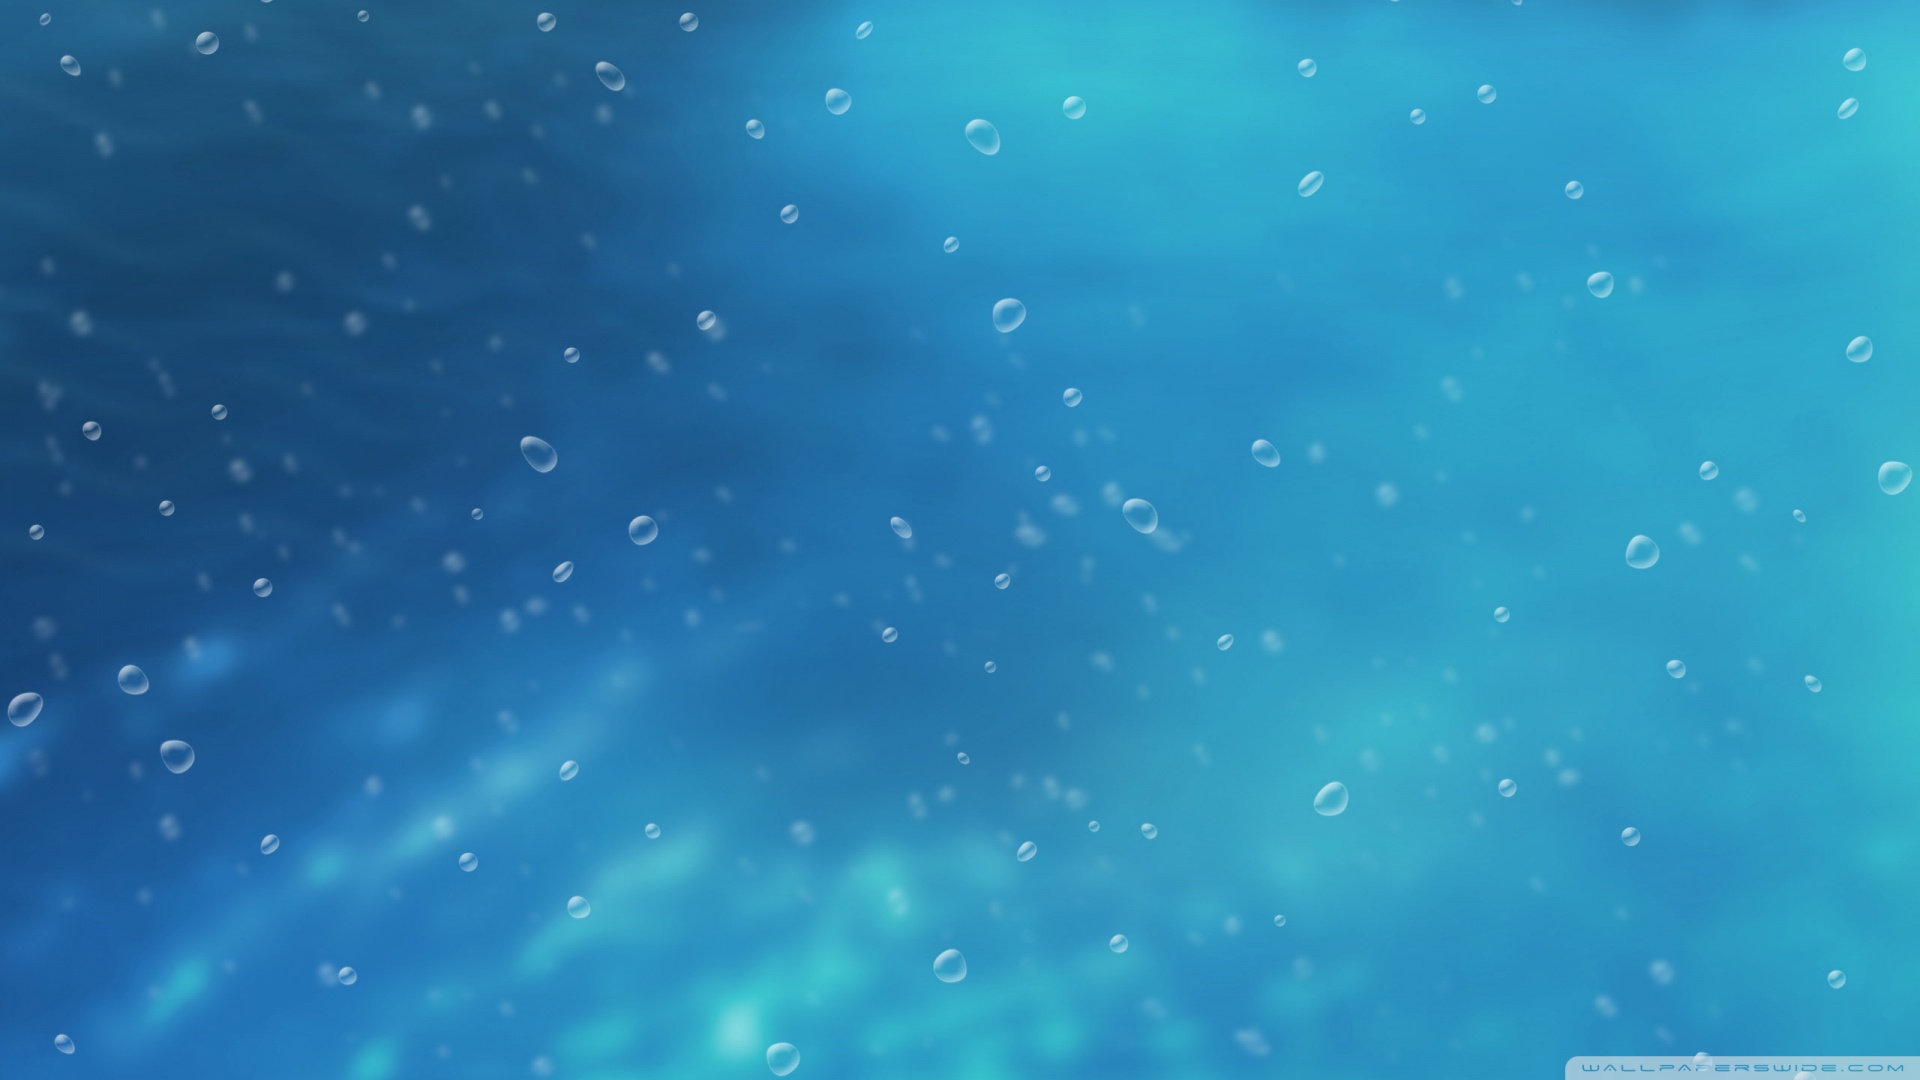 Light Blue Background With Bubbles Wallpaper